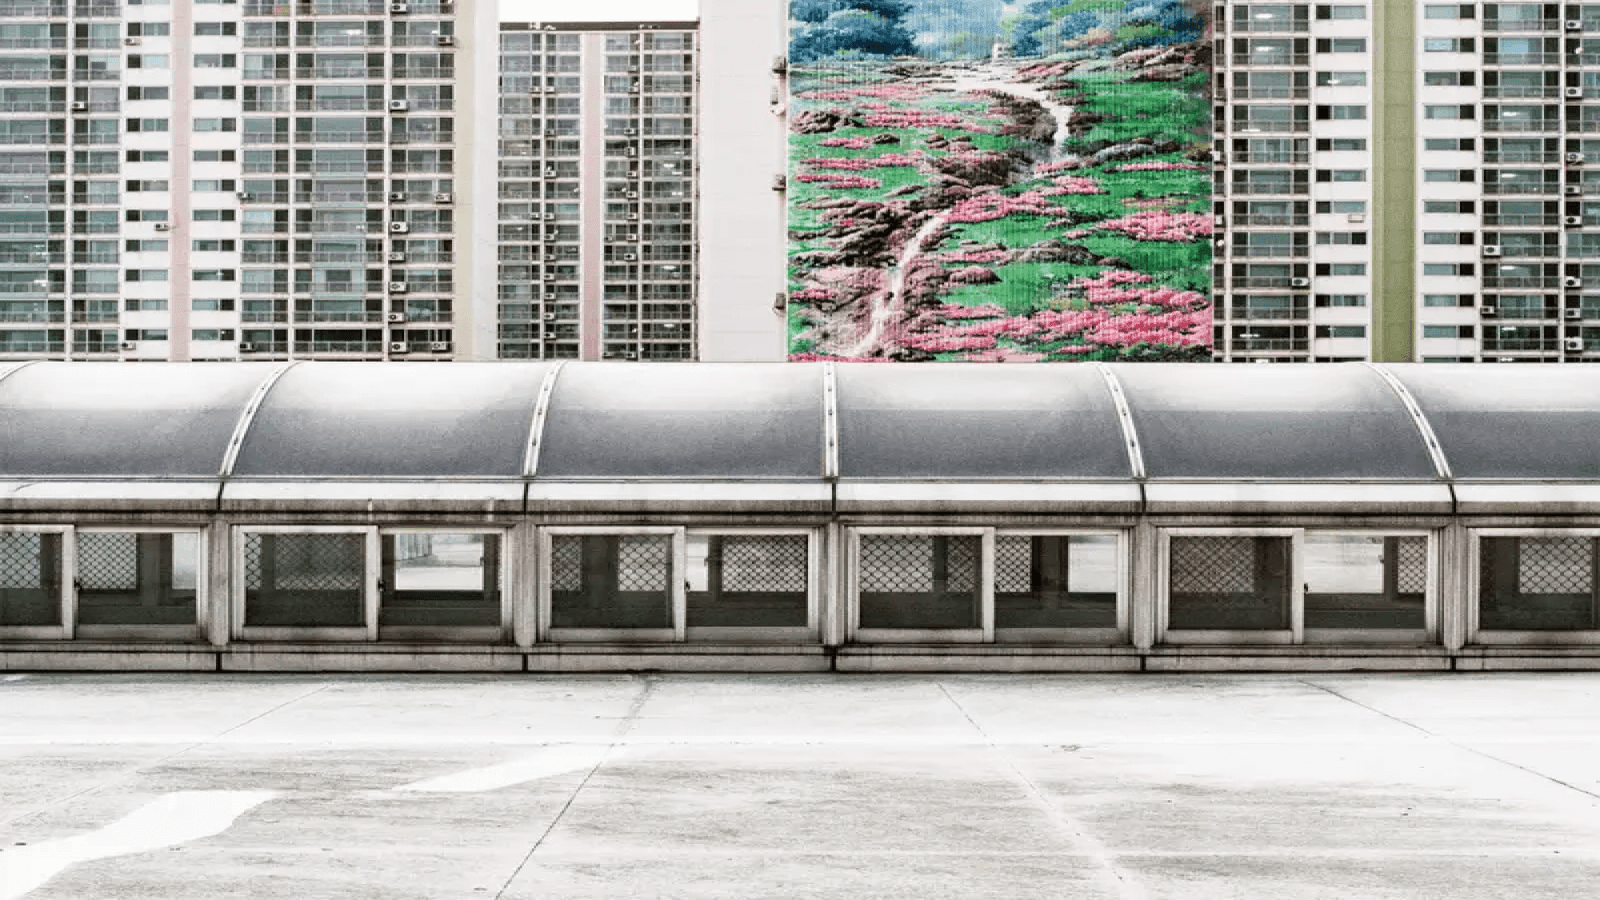 Urban Nature Photography Solo Exhibition at TUV Rheinland Gallery in Seoul